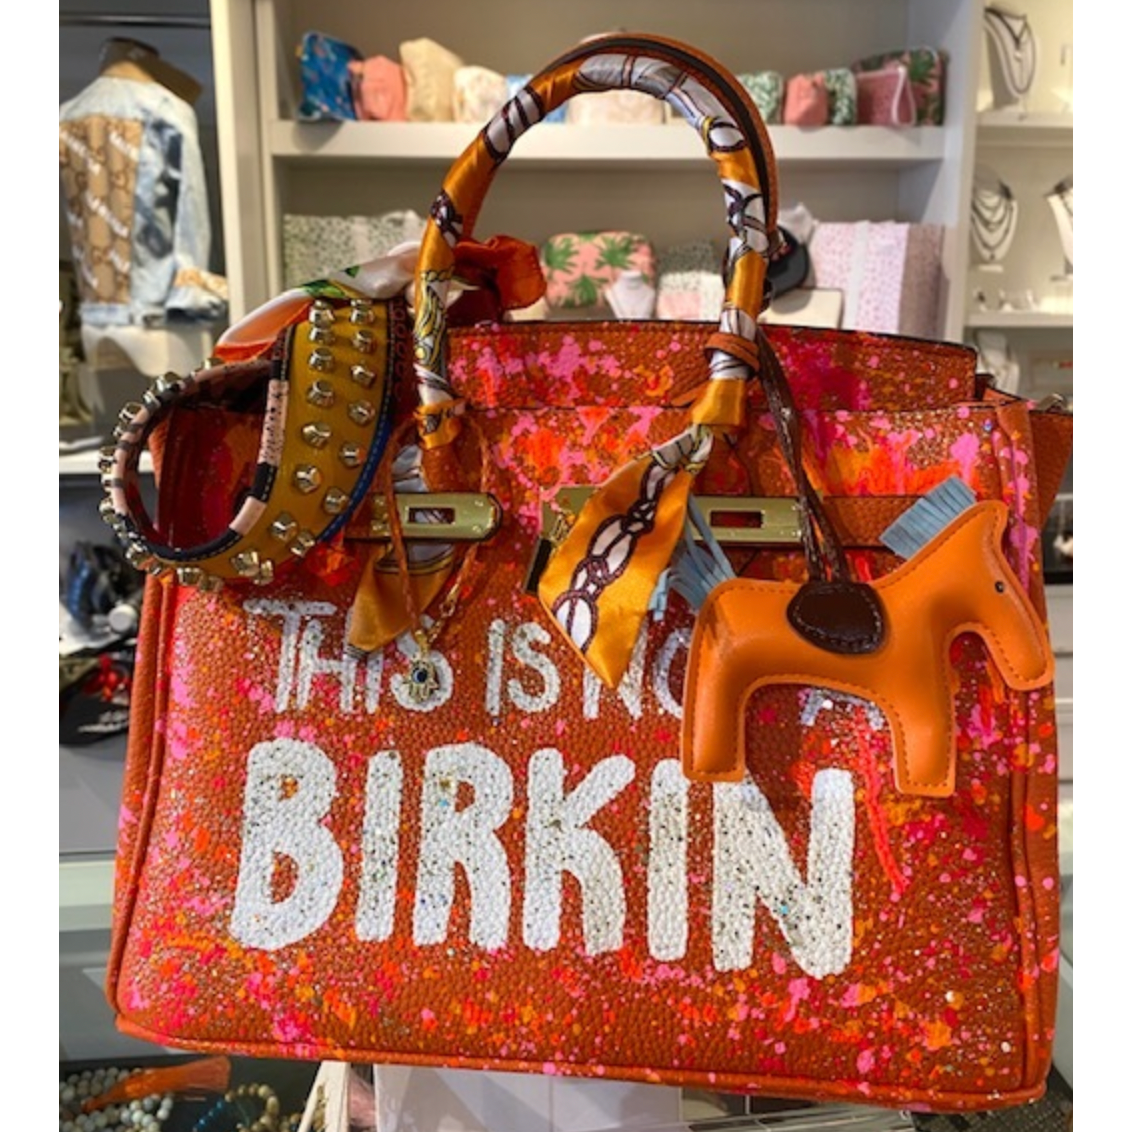 This Is Not A Birkin